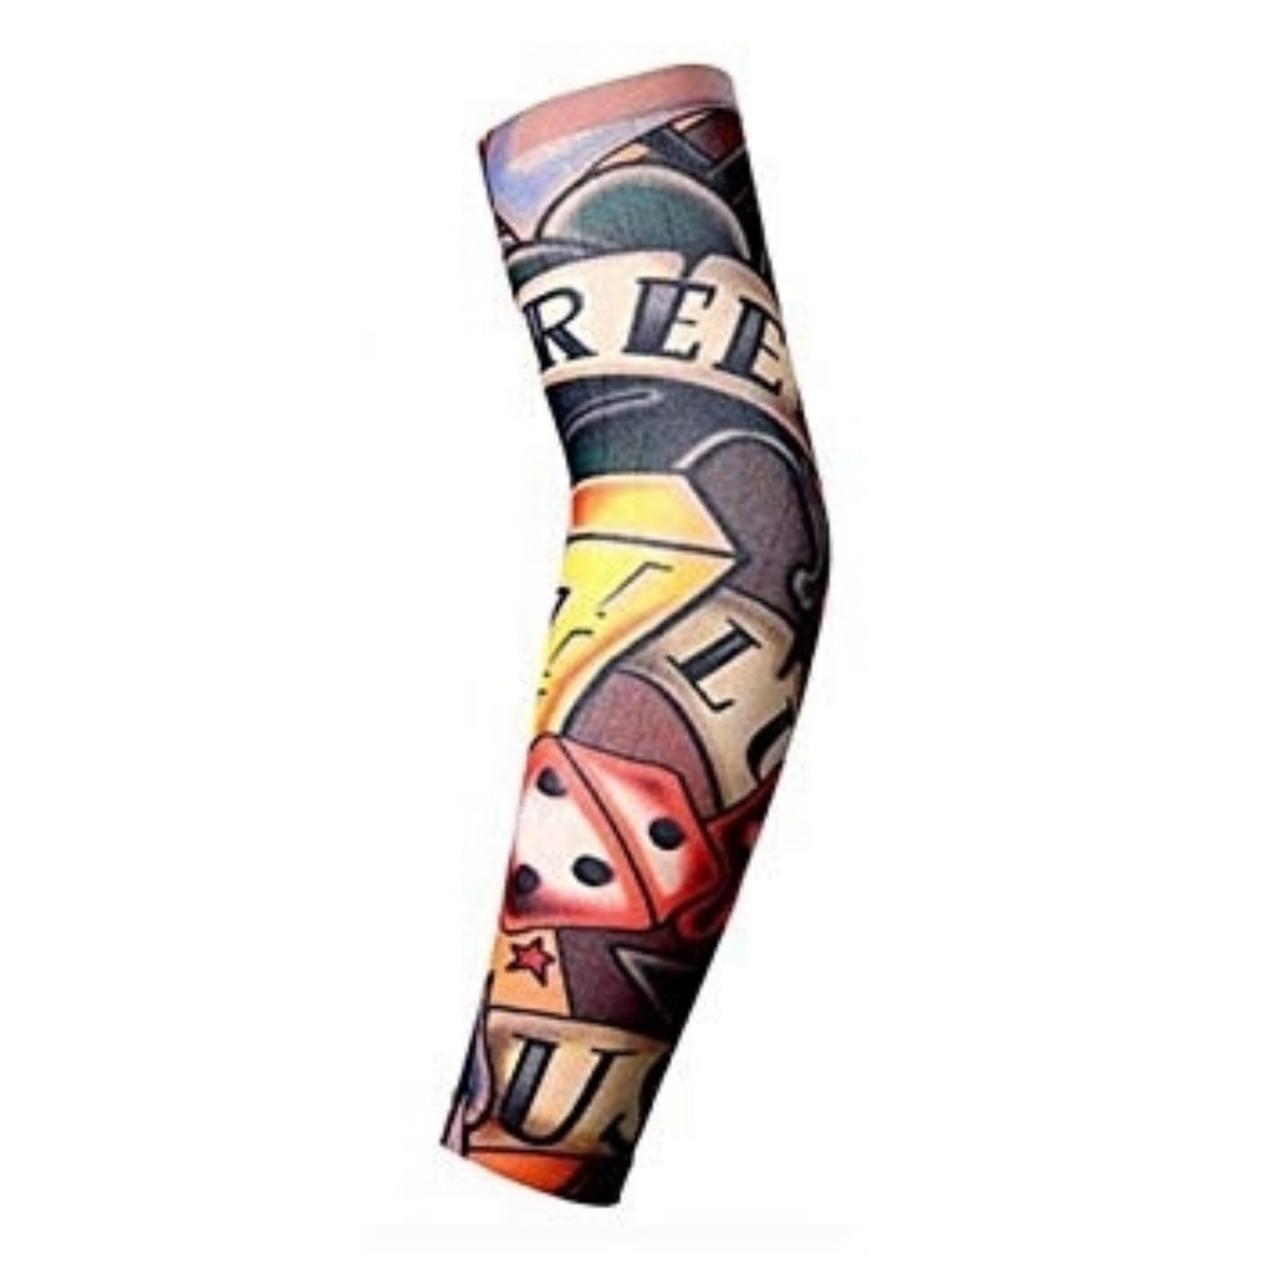 6 pcs Temporary Tattoo Arm Sleeves Stretchy Nylon Arts Fake Slip-on Arm  Sunscreen Sleeves Outdoor Sunscreen Riding Cycling Elbow Braces Body Art  Arm Stockings Slip Accessories for Men Women